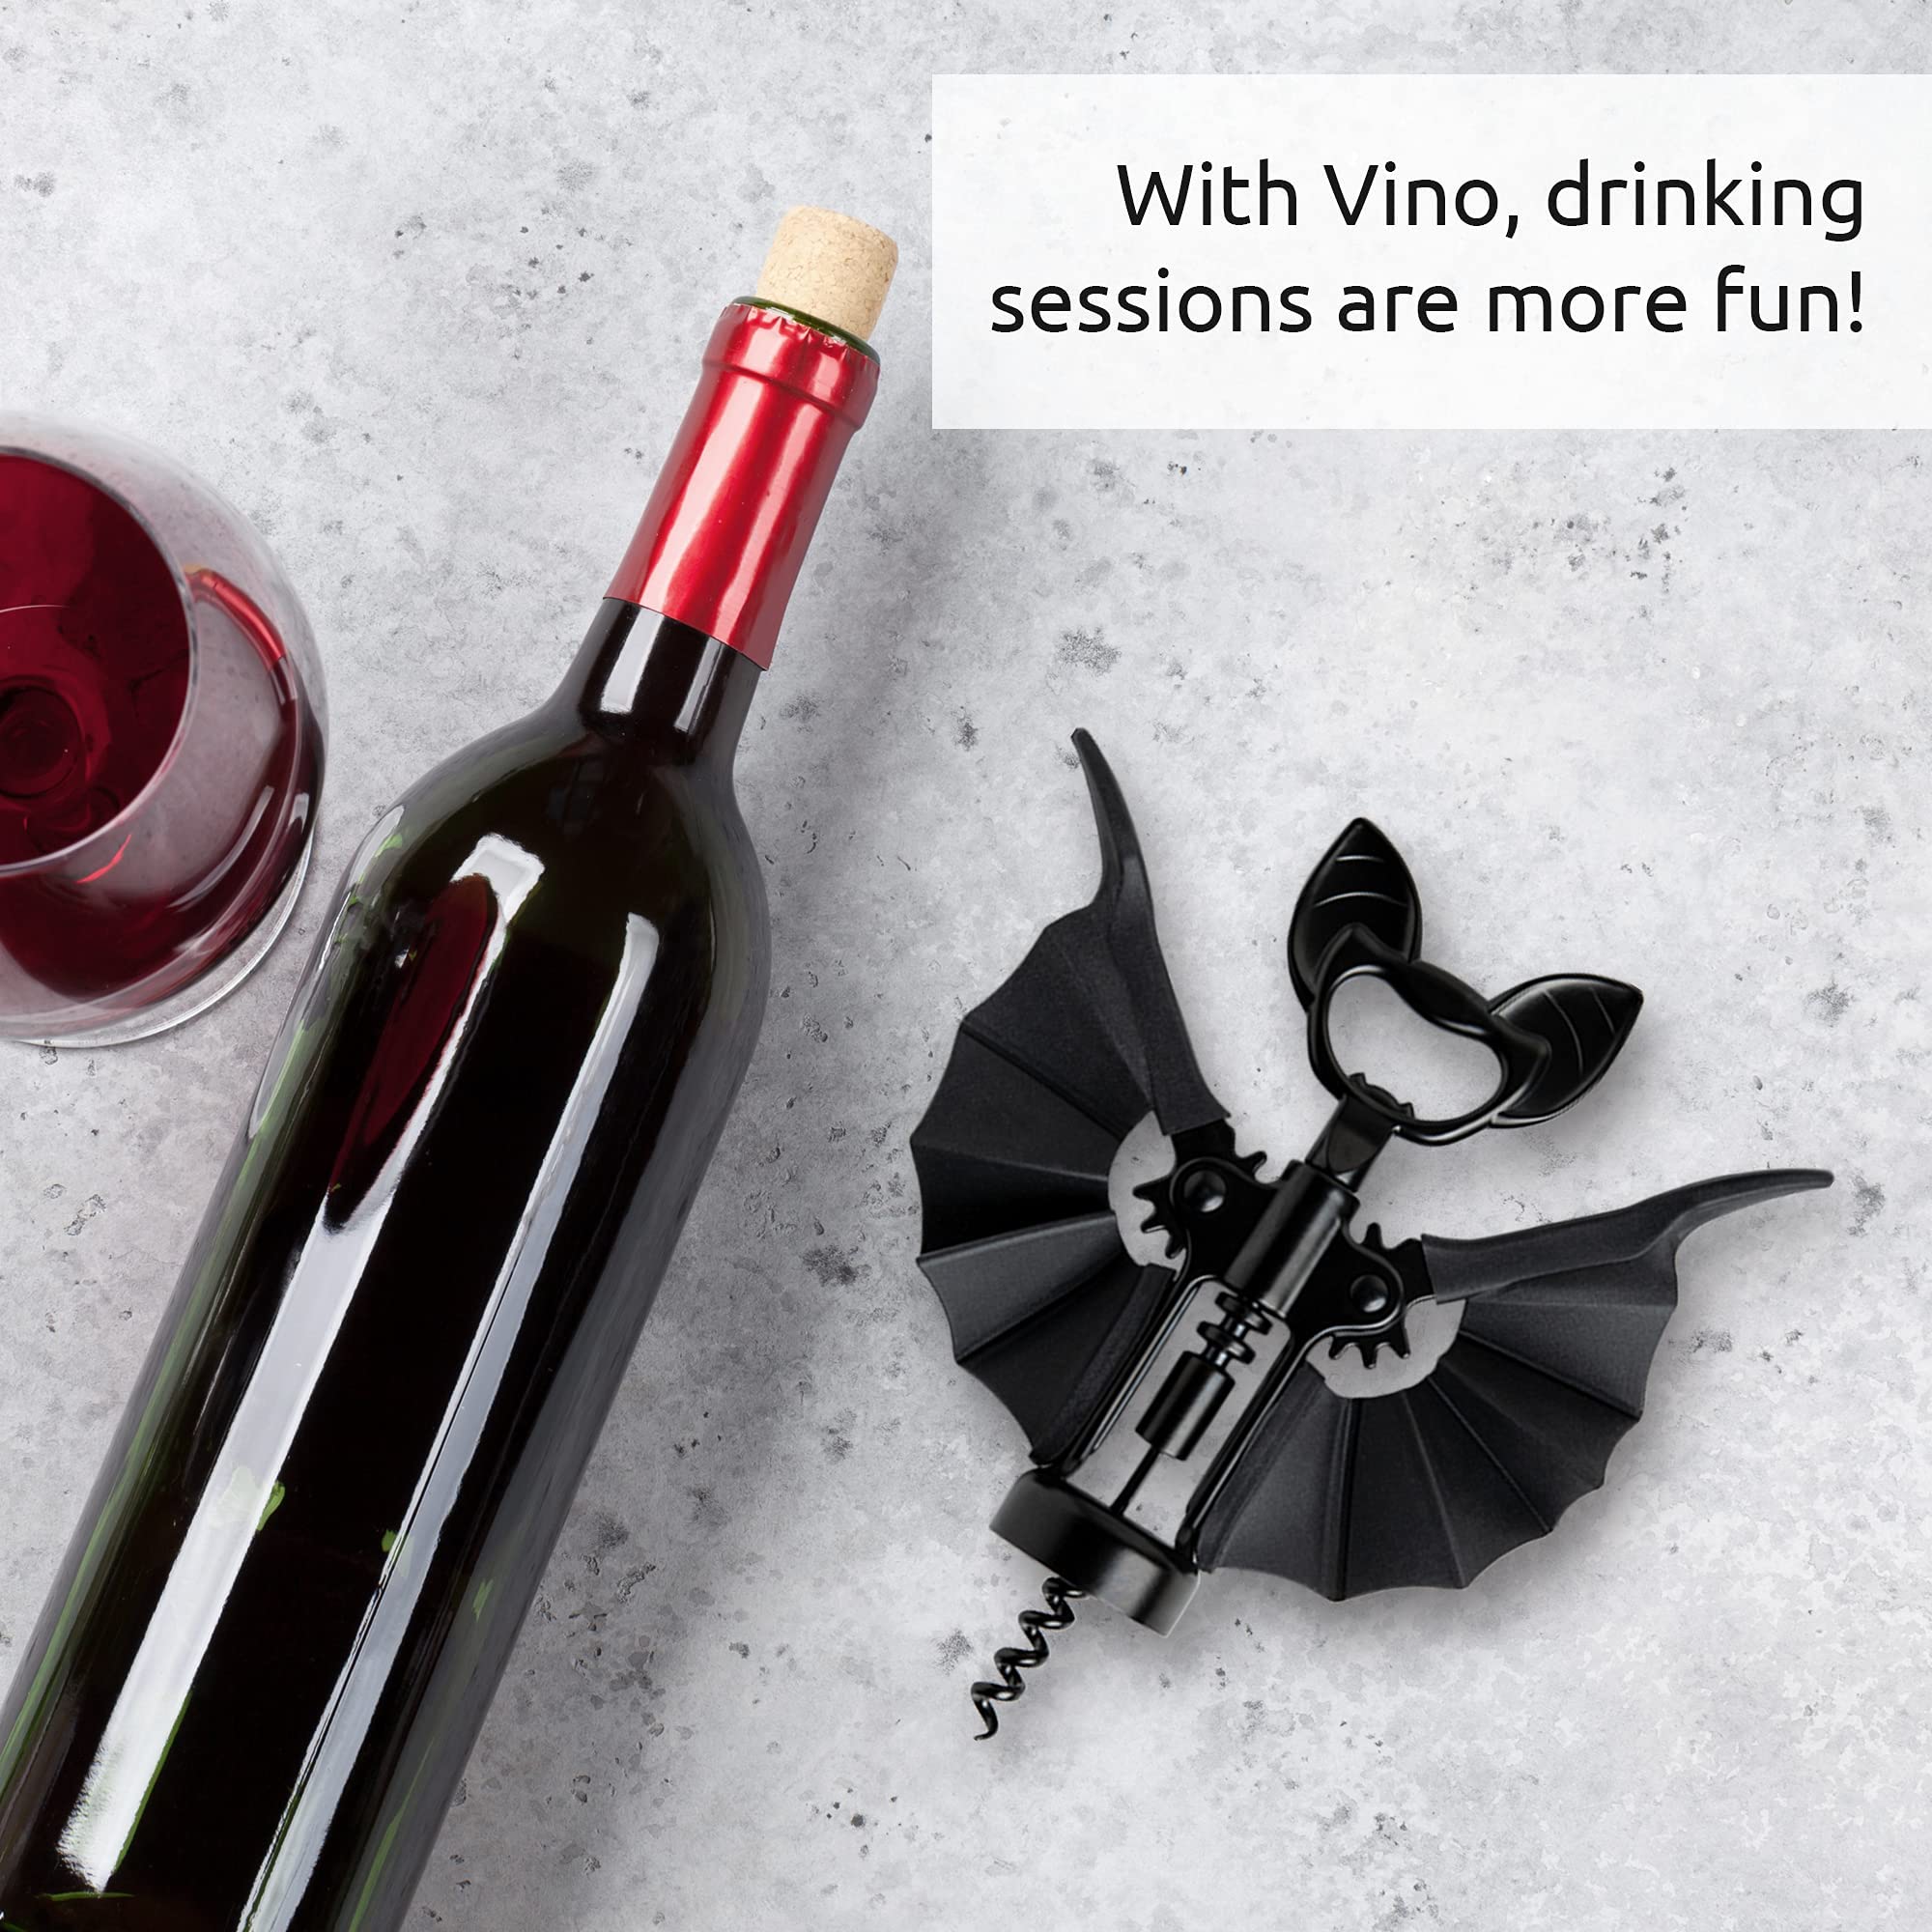 Vino Spooky Bat 2-in-1 Wine & Beer Opener and Agatha Kitchen Spoon Rest by OTOTO - Bundle of 2 Fun Kitchen Gadgets